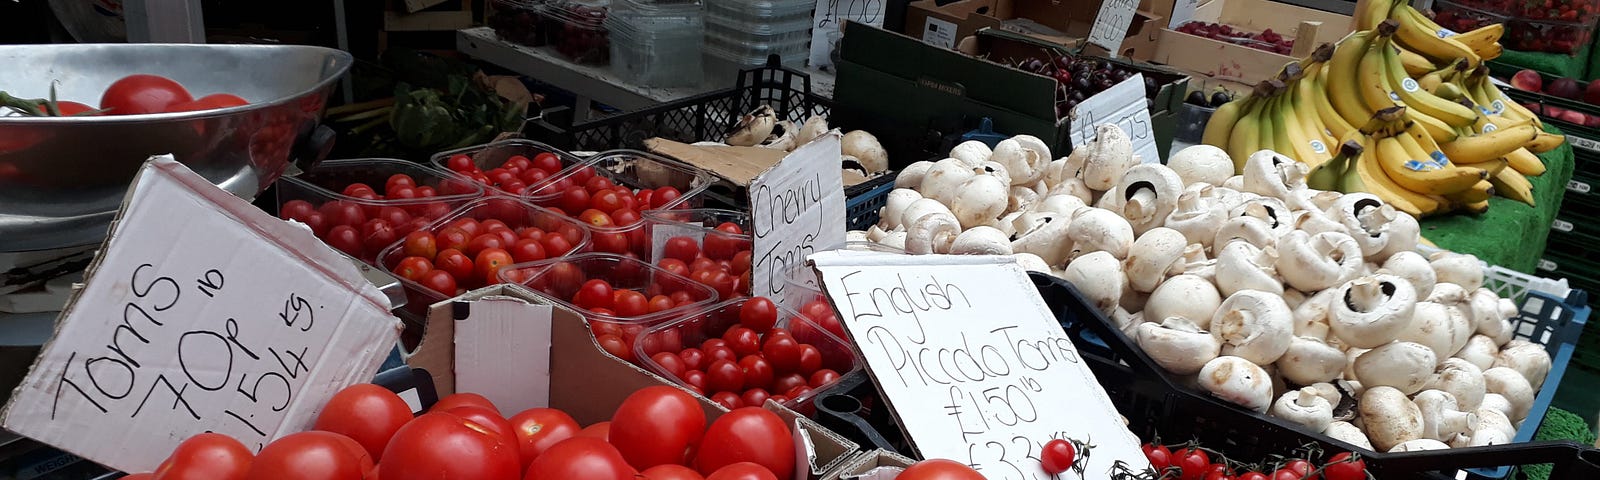 fruit and vegetable stall Lincoln Central Market facing eviction